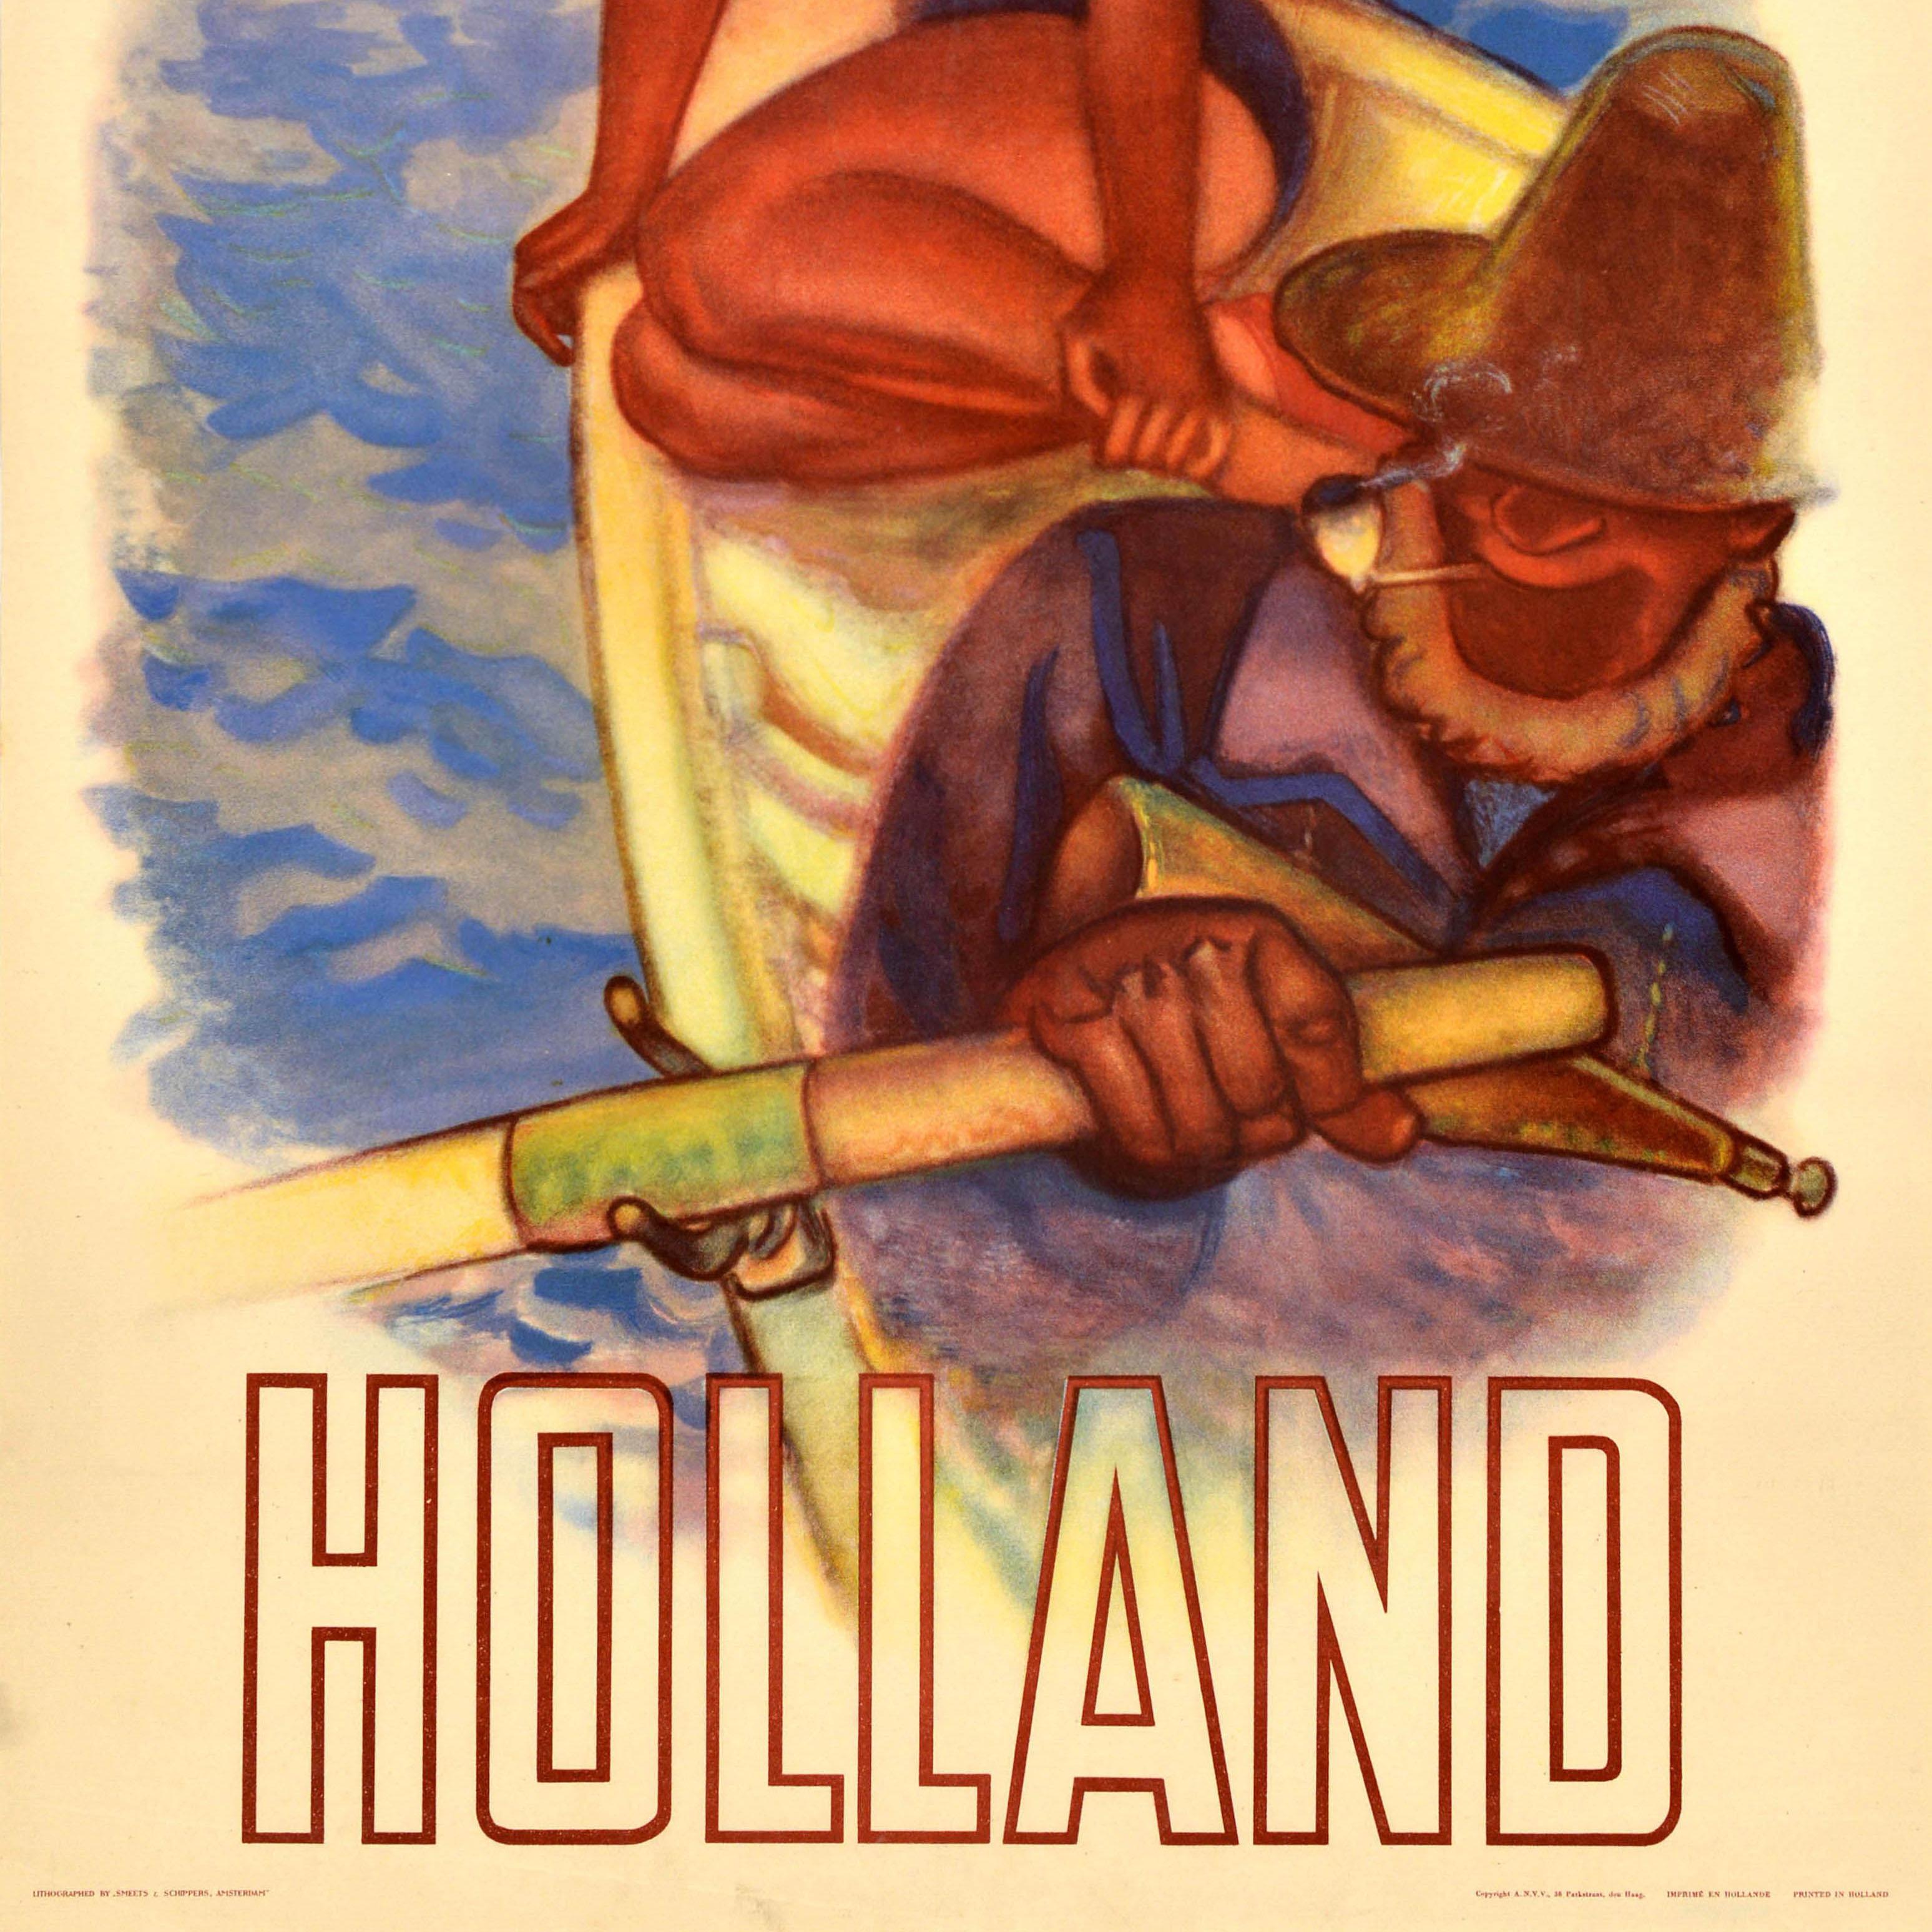 Original Vintage Travel Poster Holland Beach Fisherman Netherlands Midcentury In Good Condition For Sale In London, GB